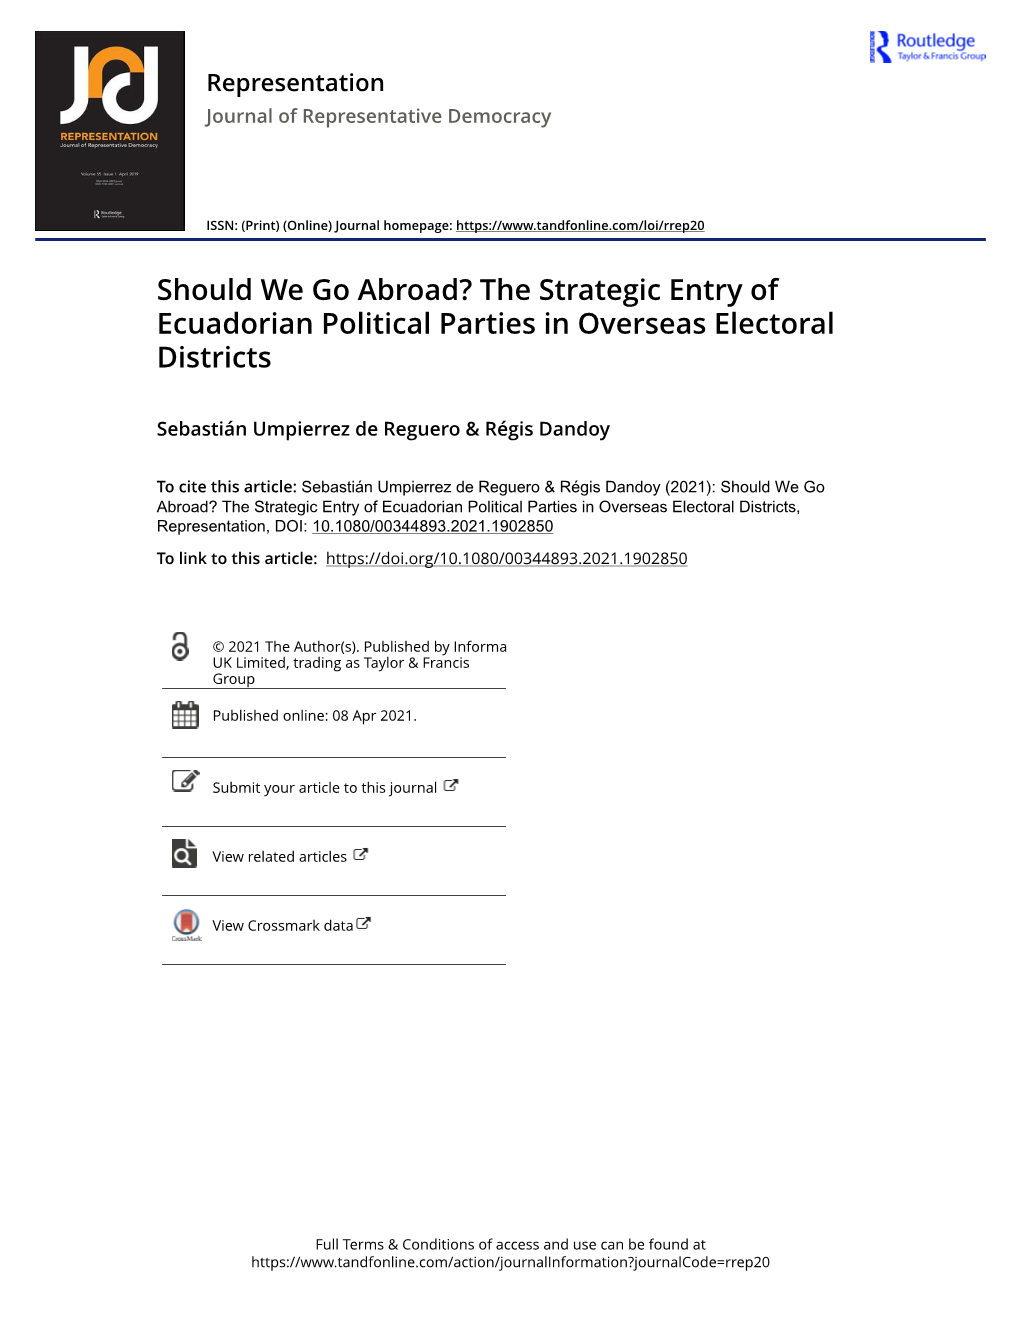 The Strategic Entry of Ecuadorian Political Parties in Overseas Electoral Districts